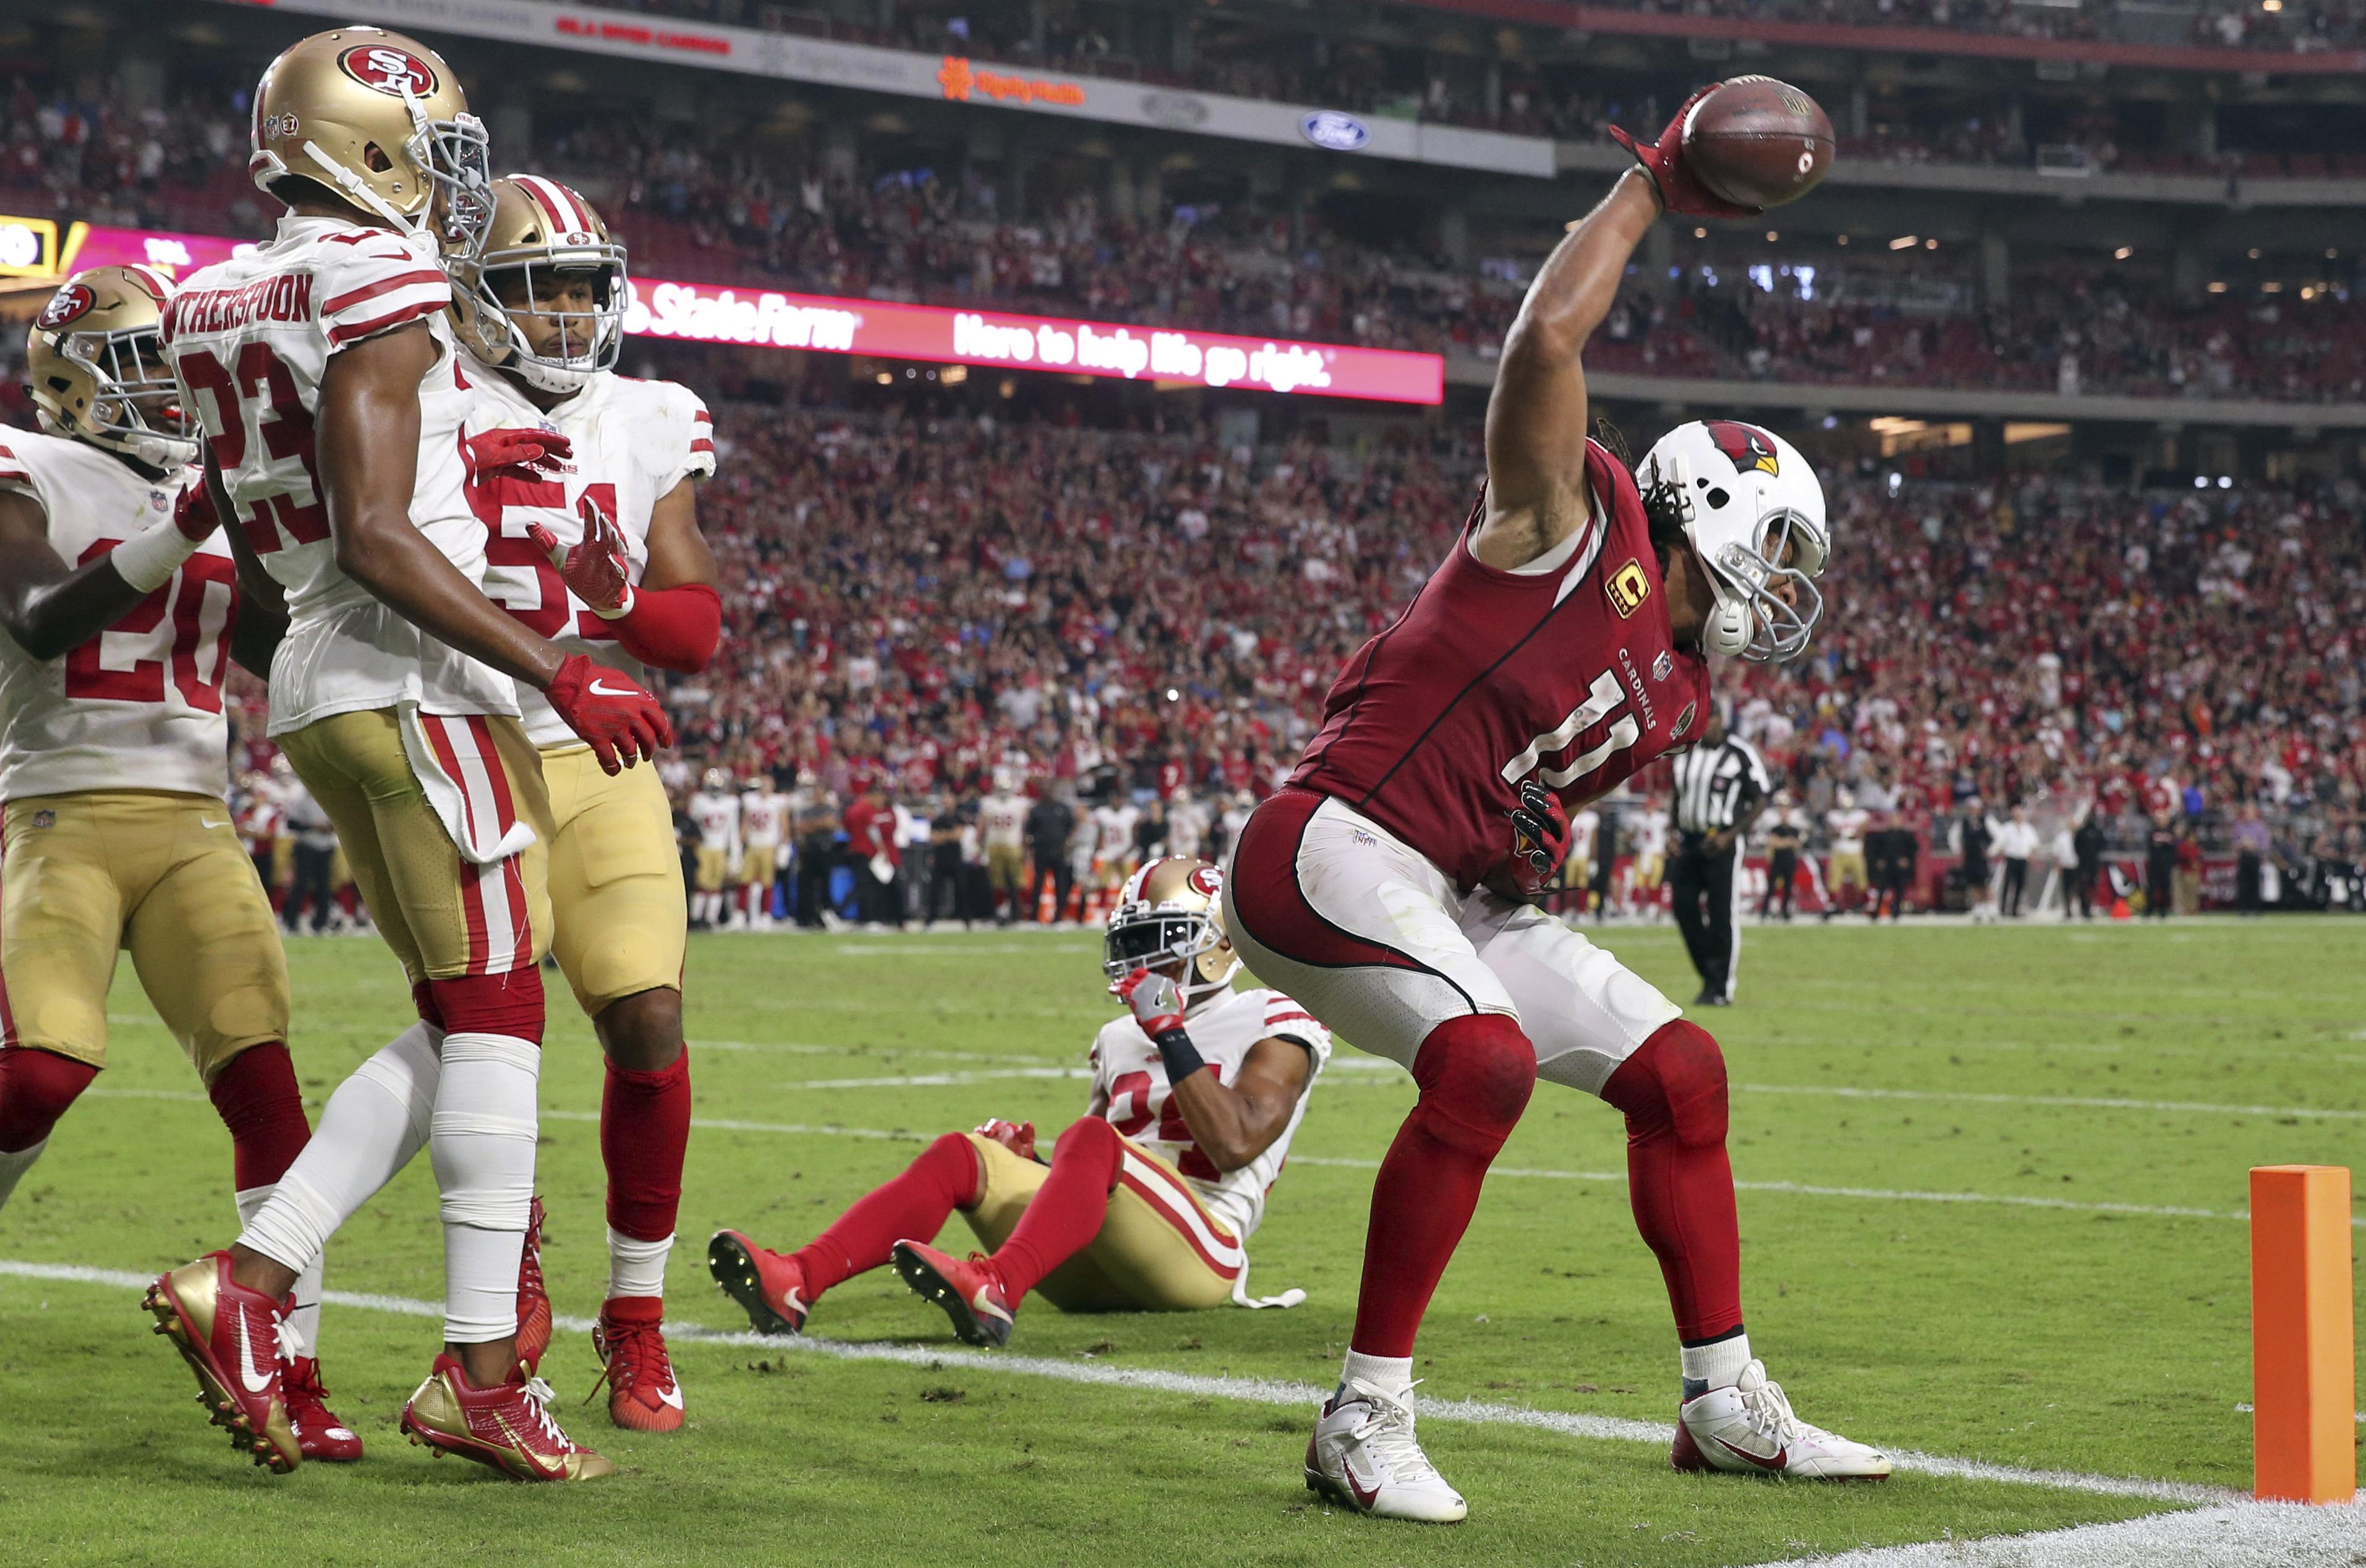 Larry Fitzgerald was so upset his son skipped his NFL game, he spiked a